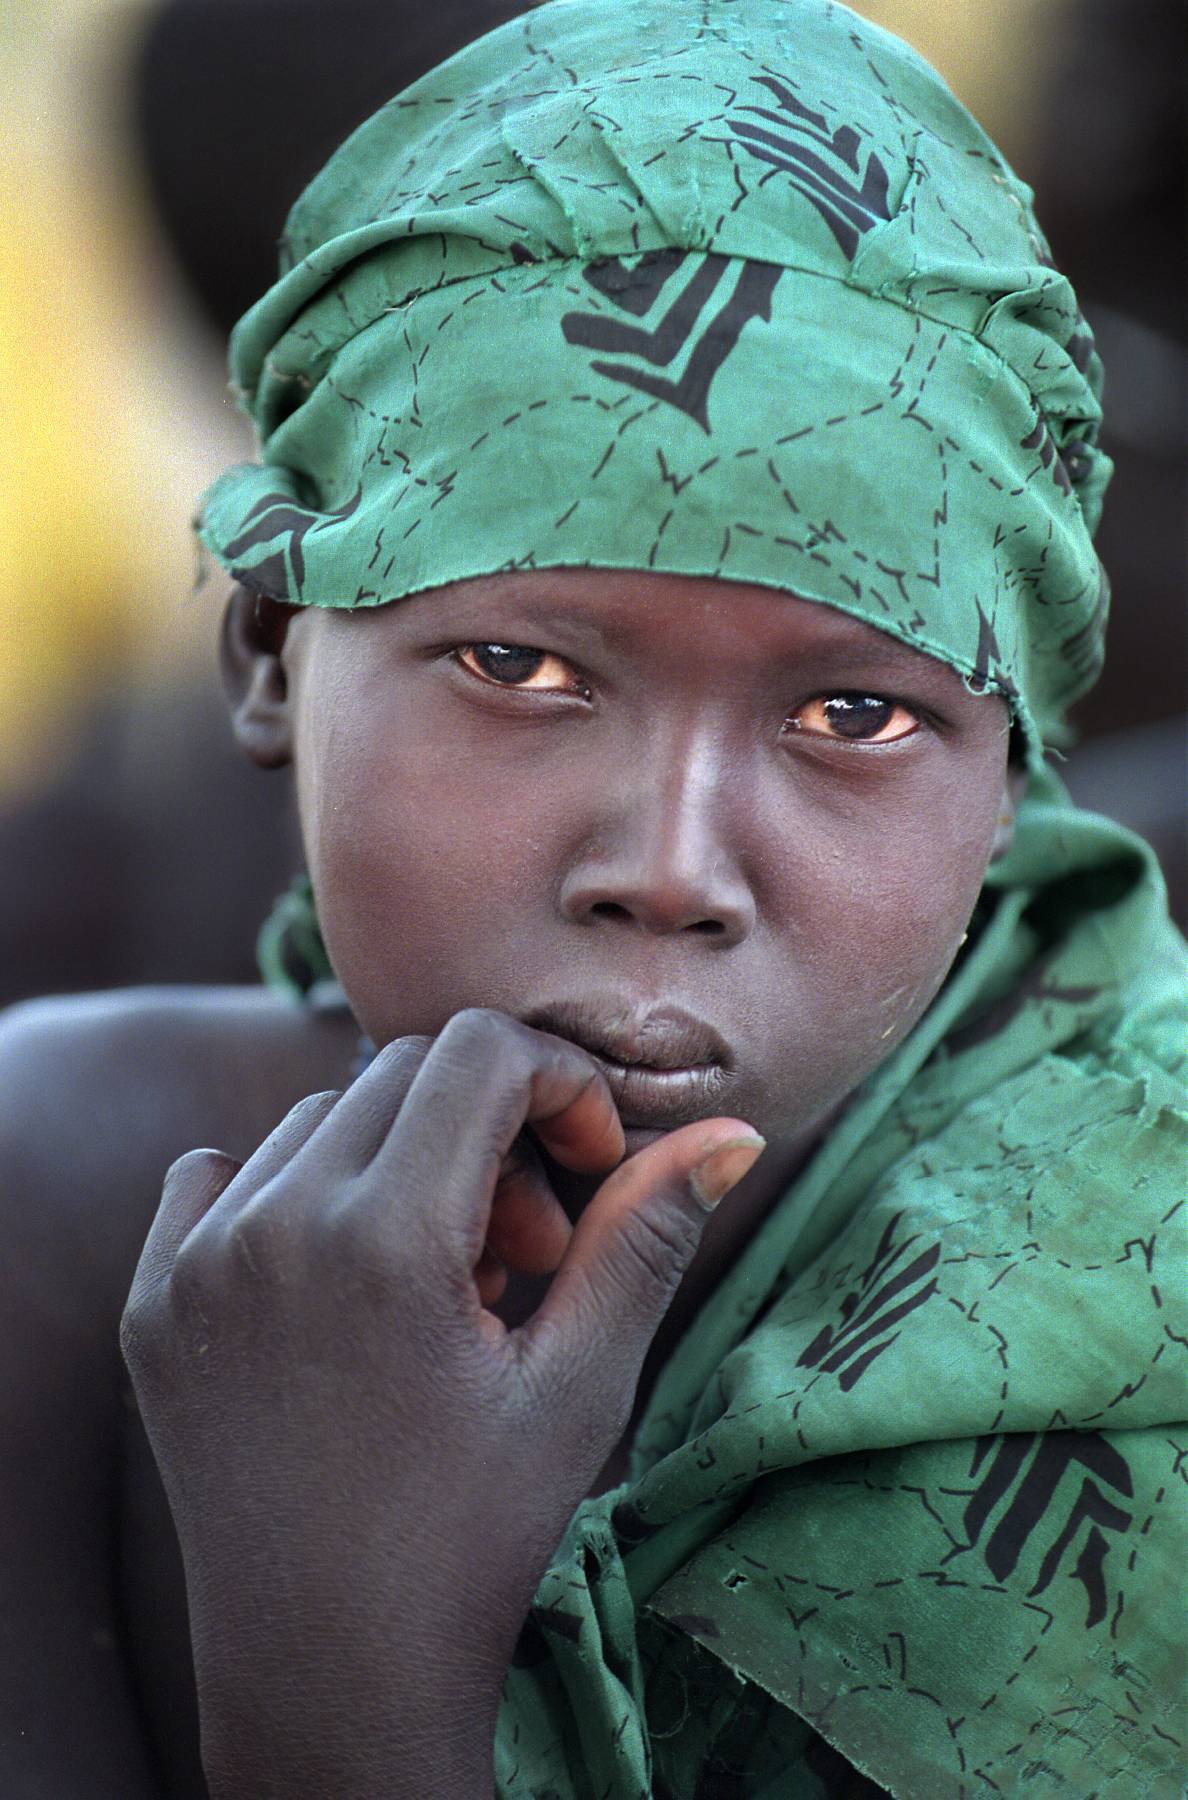  Eight-year-old Nyadeng Deng remains haunted by the night raiders that stormed her South Sudan village and burned it to the ground. Her young eyes watched in terror as friends and relatives were slaughtered by Muhuraleen forces. She does not know if 